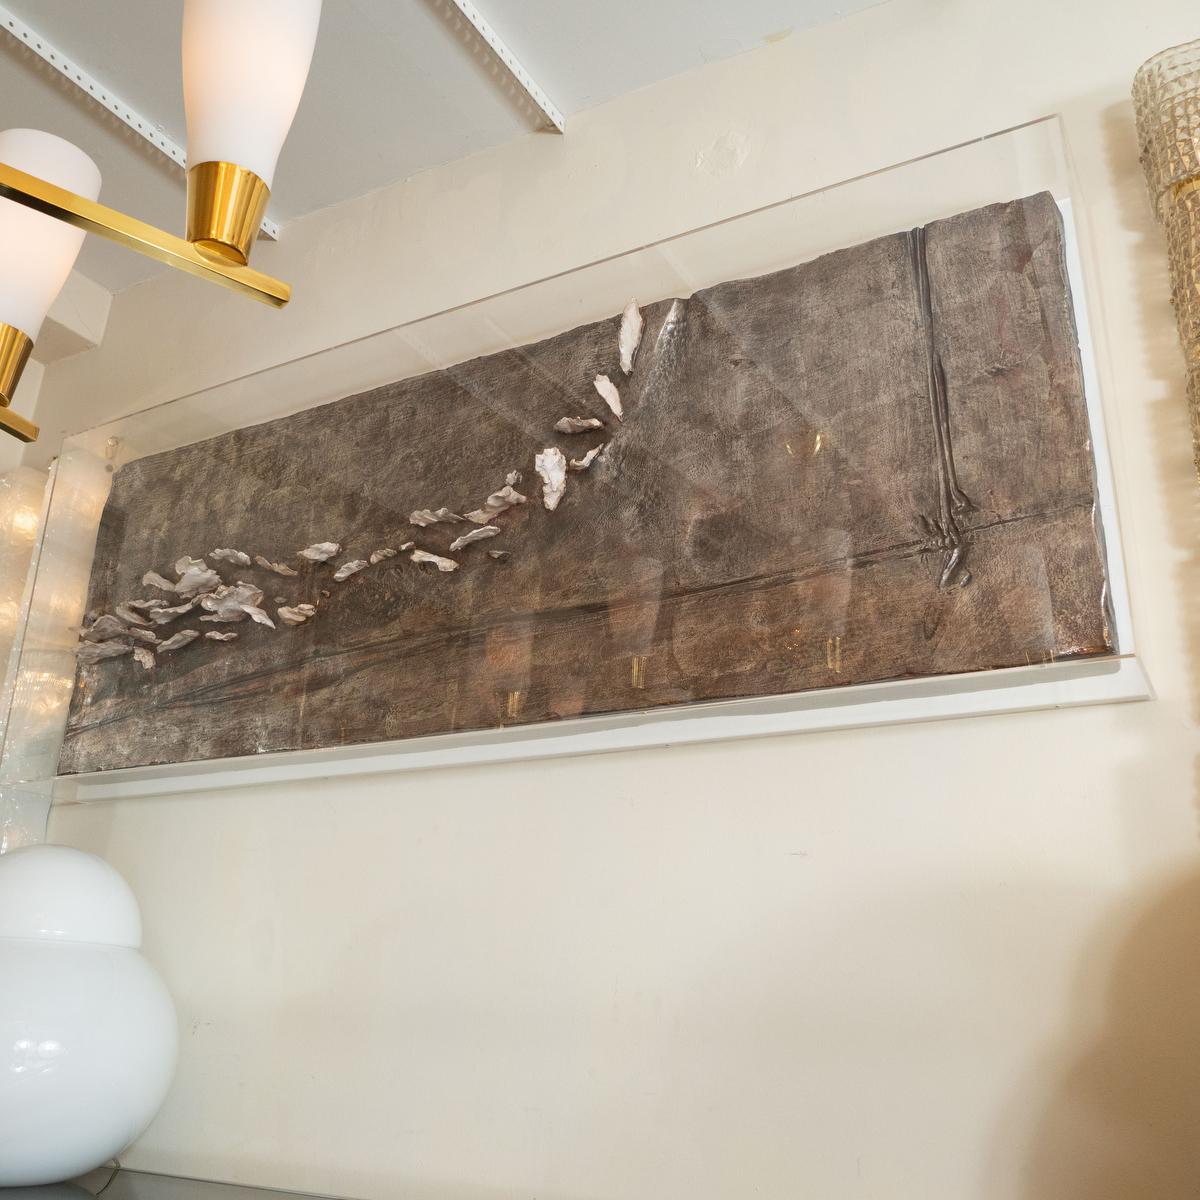 Rectangular metal leaf and plaster wall appliqué encased in acrylic by Nicola Perilli.